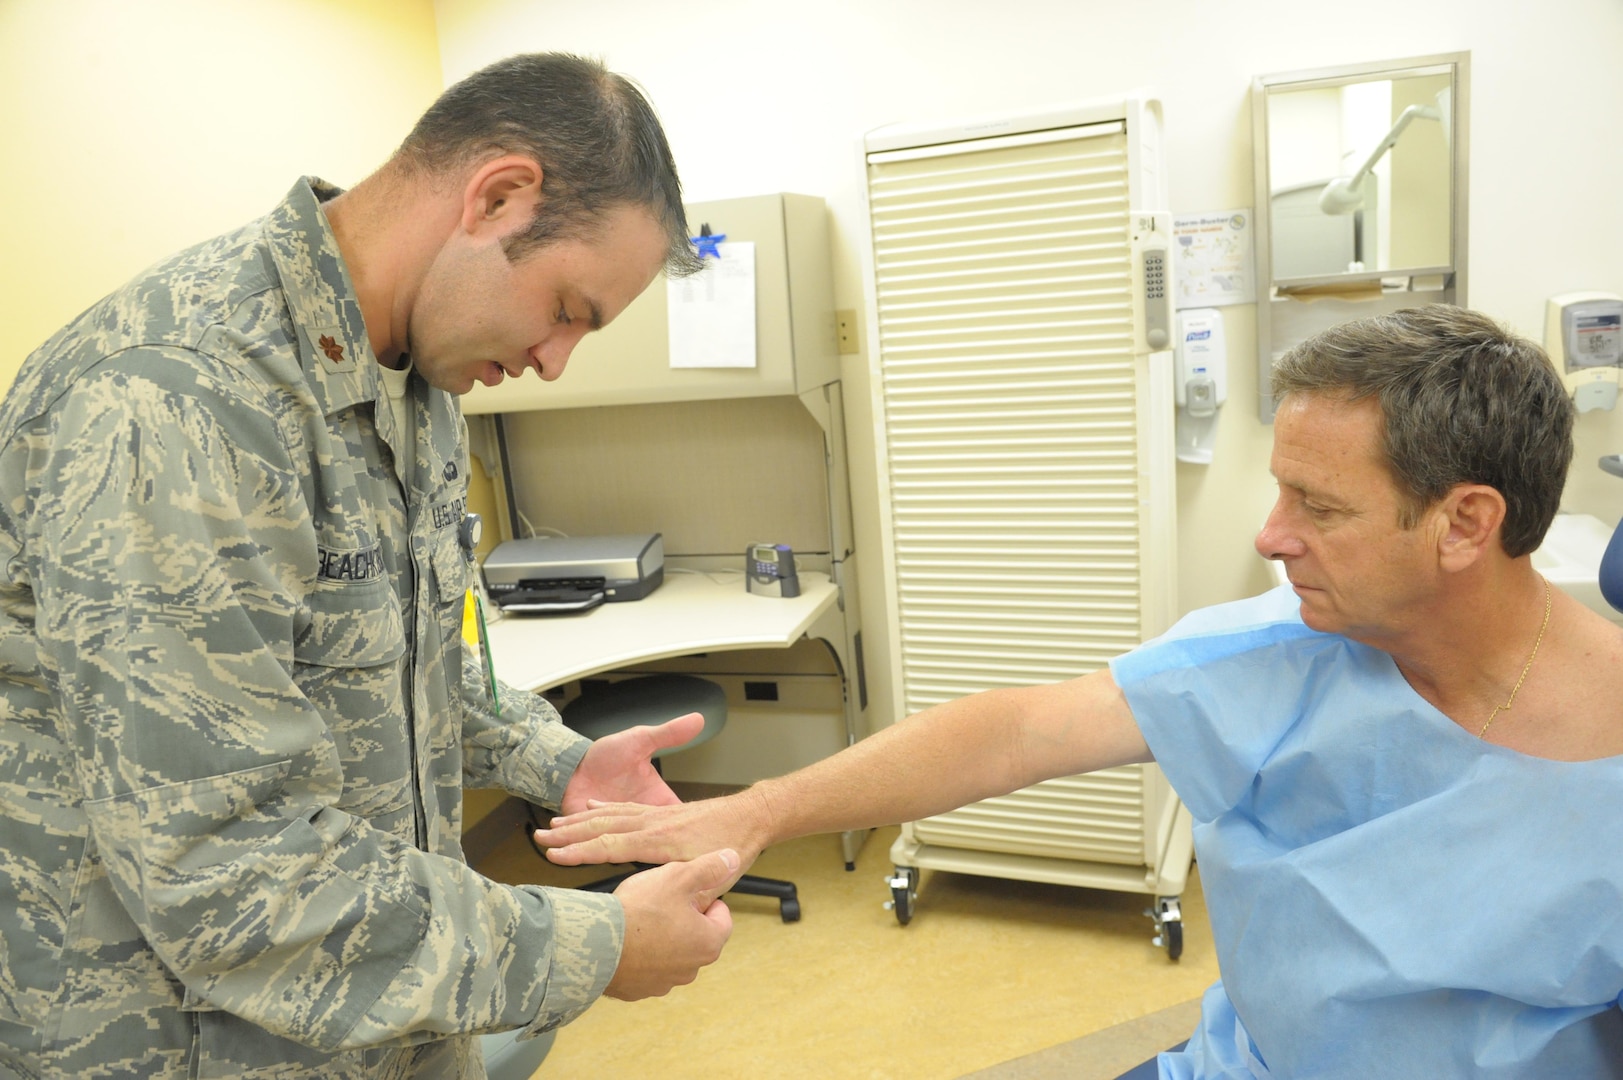 Maj. (Dr.) Thomas Beachkofsky, 59th Medical Specialty Squadron dermatologist, checks a patient for abnormal skin growths Tuesday at the Joint Base San Antonio-Randolph Medical Clinic.The 59th Medical Wing at Joint Base San Antonio-Lackland has expanded dermatology services to the JBSA-Randolph Medical Clinic, Beachkofsky, started seeing patients May 17 at the 359th Medical Group facility on Third Street West.
